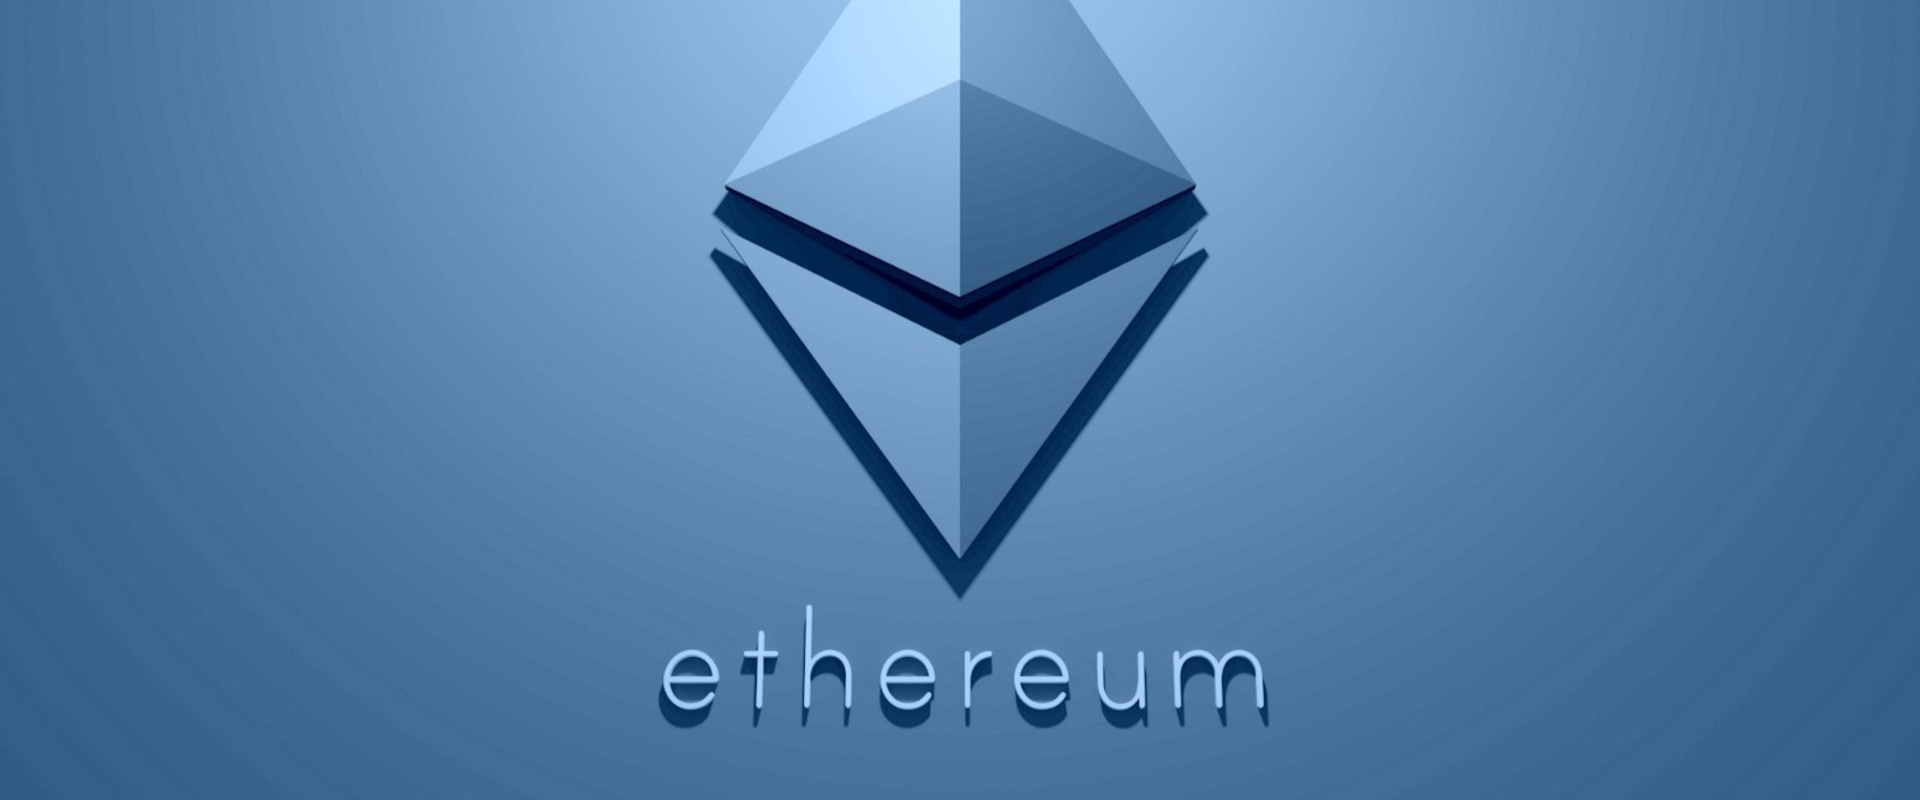 Understanding Ethereum: A Comprehensive Look at the Popular Cryptocurrency